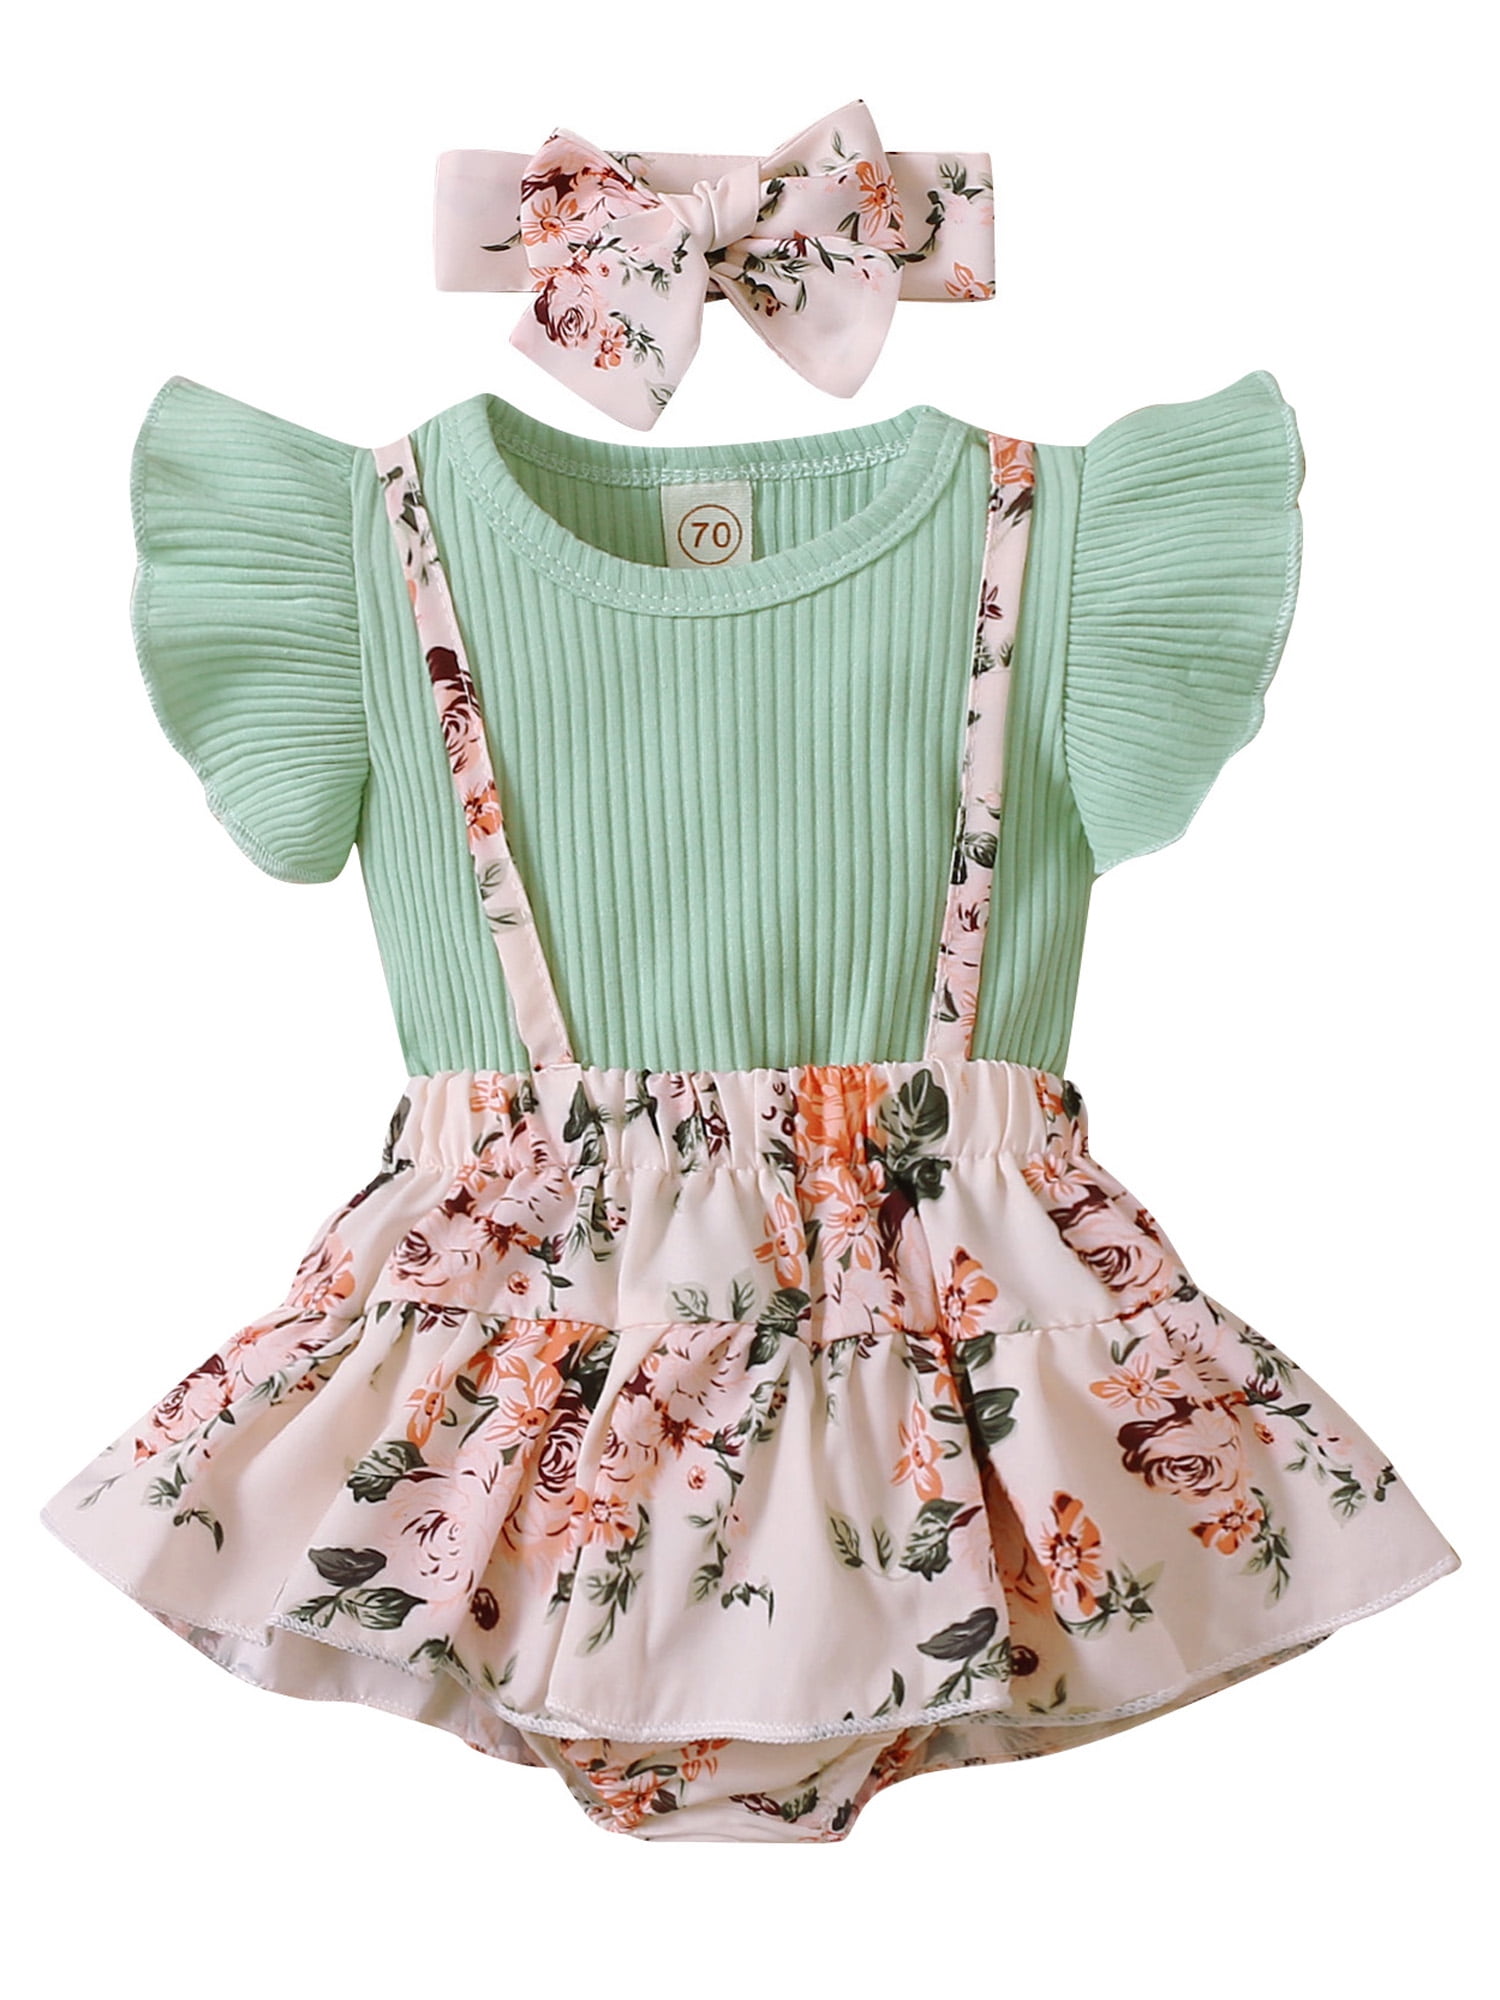 Newborn Baby Girl Solid Ribbed Ruffled Romper+Floral Daisy Skirt Outfit 3PCS Set 